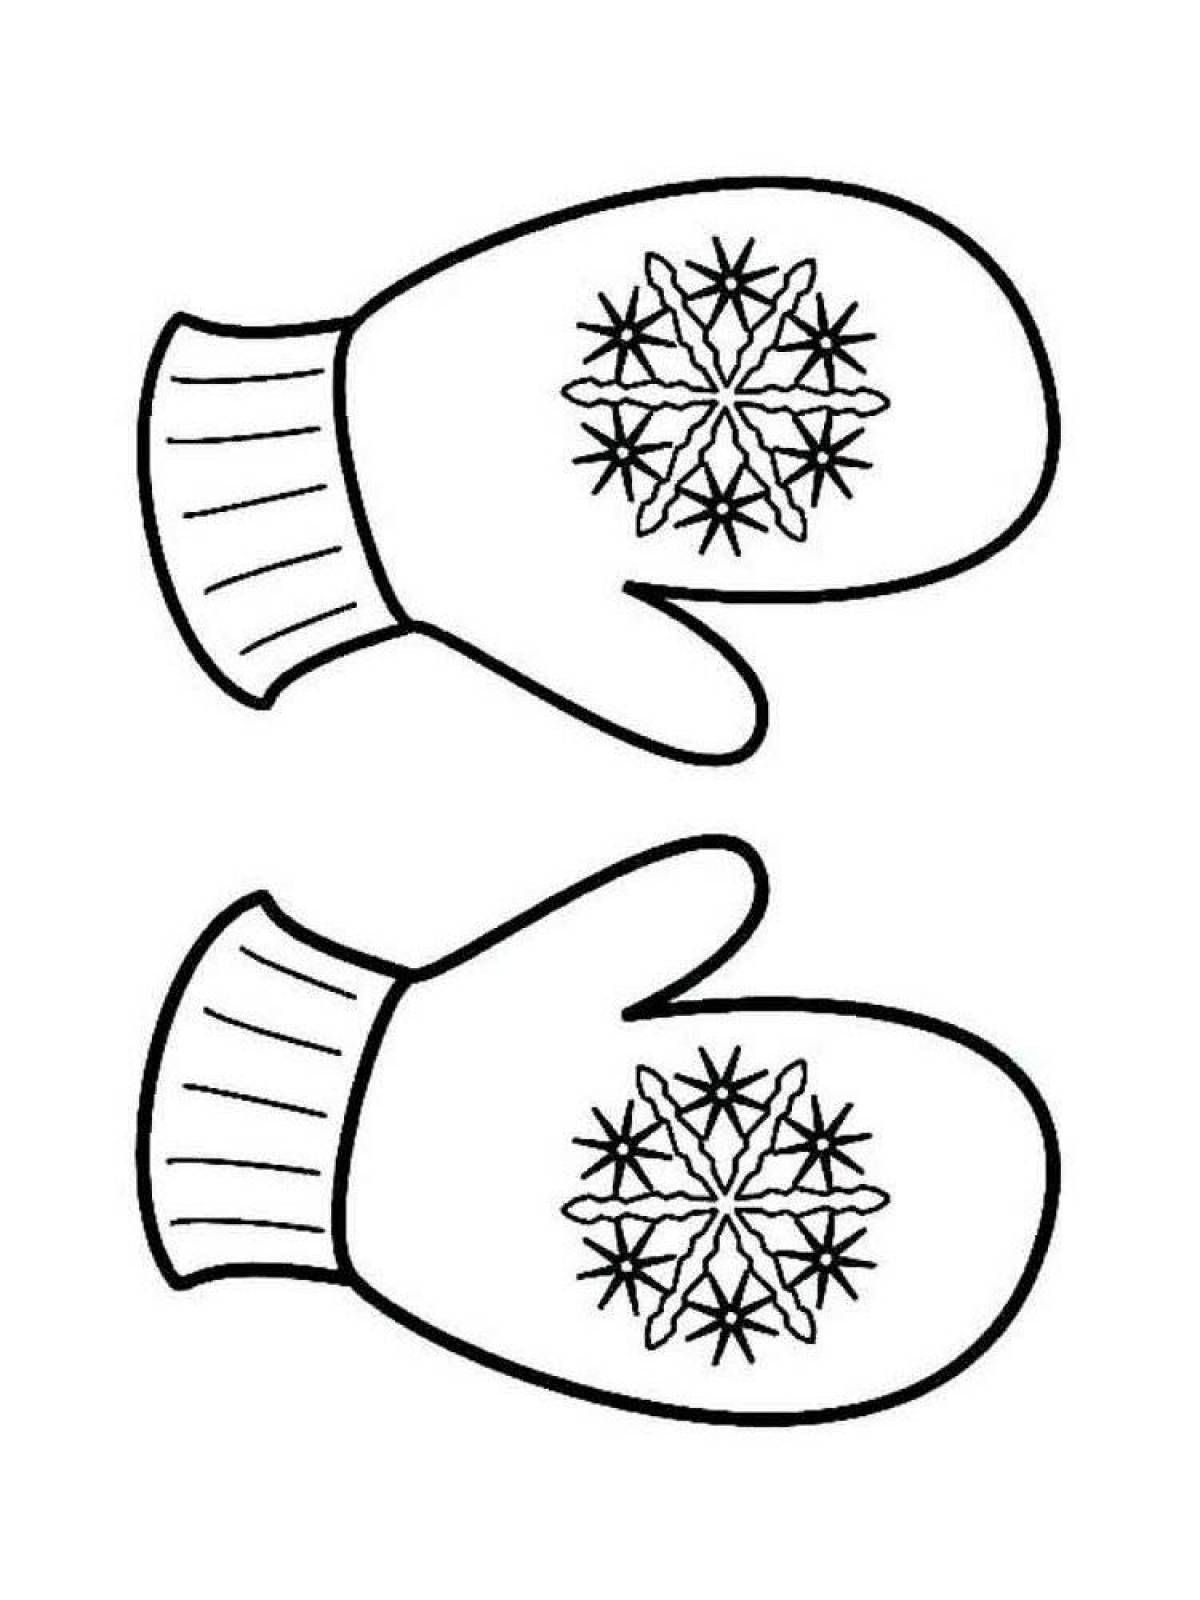 Sparkly mittens coloring for juniors